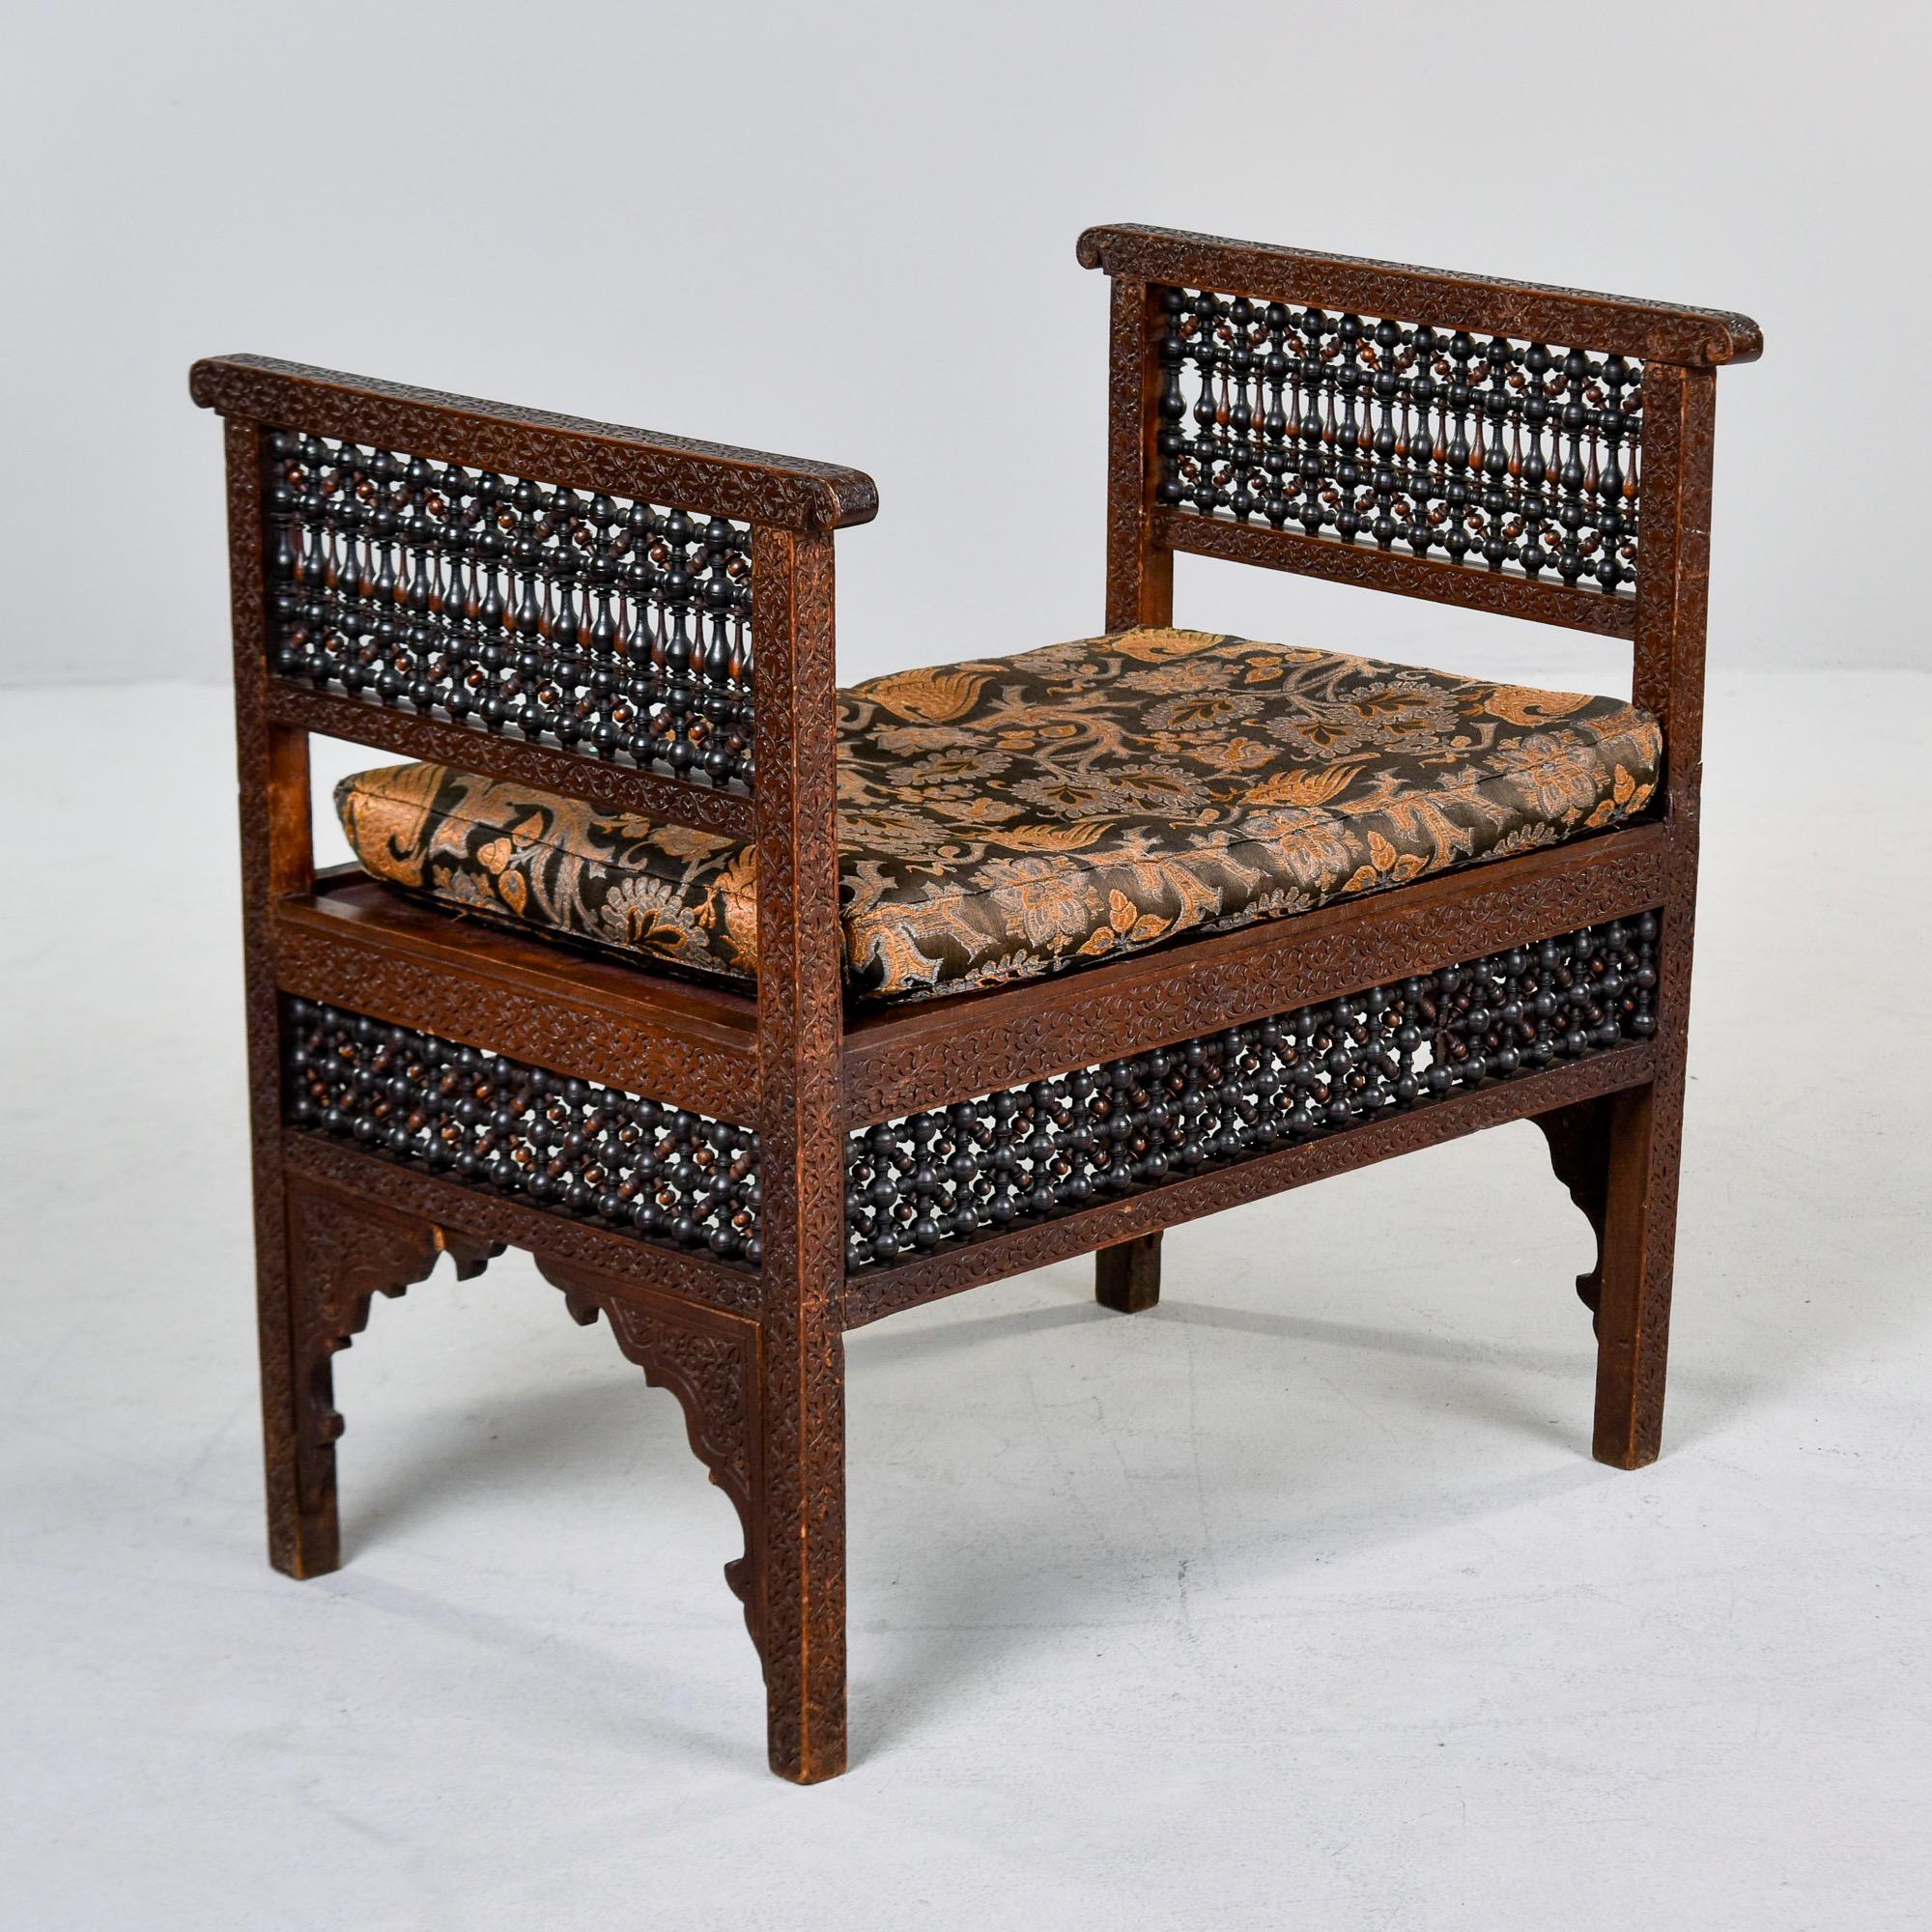 Found in Turkey, this heavily carved bench with cushion dates from the 1910s. Dark stained wood frame - we believe this is teak but cannot be sure - has intricate, highly carved detail on the high sides and apron. Moorish style arched opening on